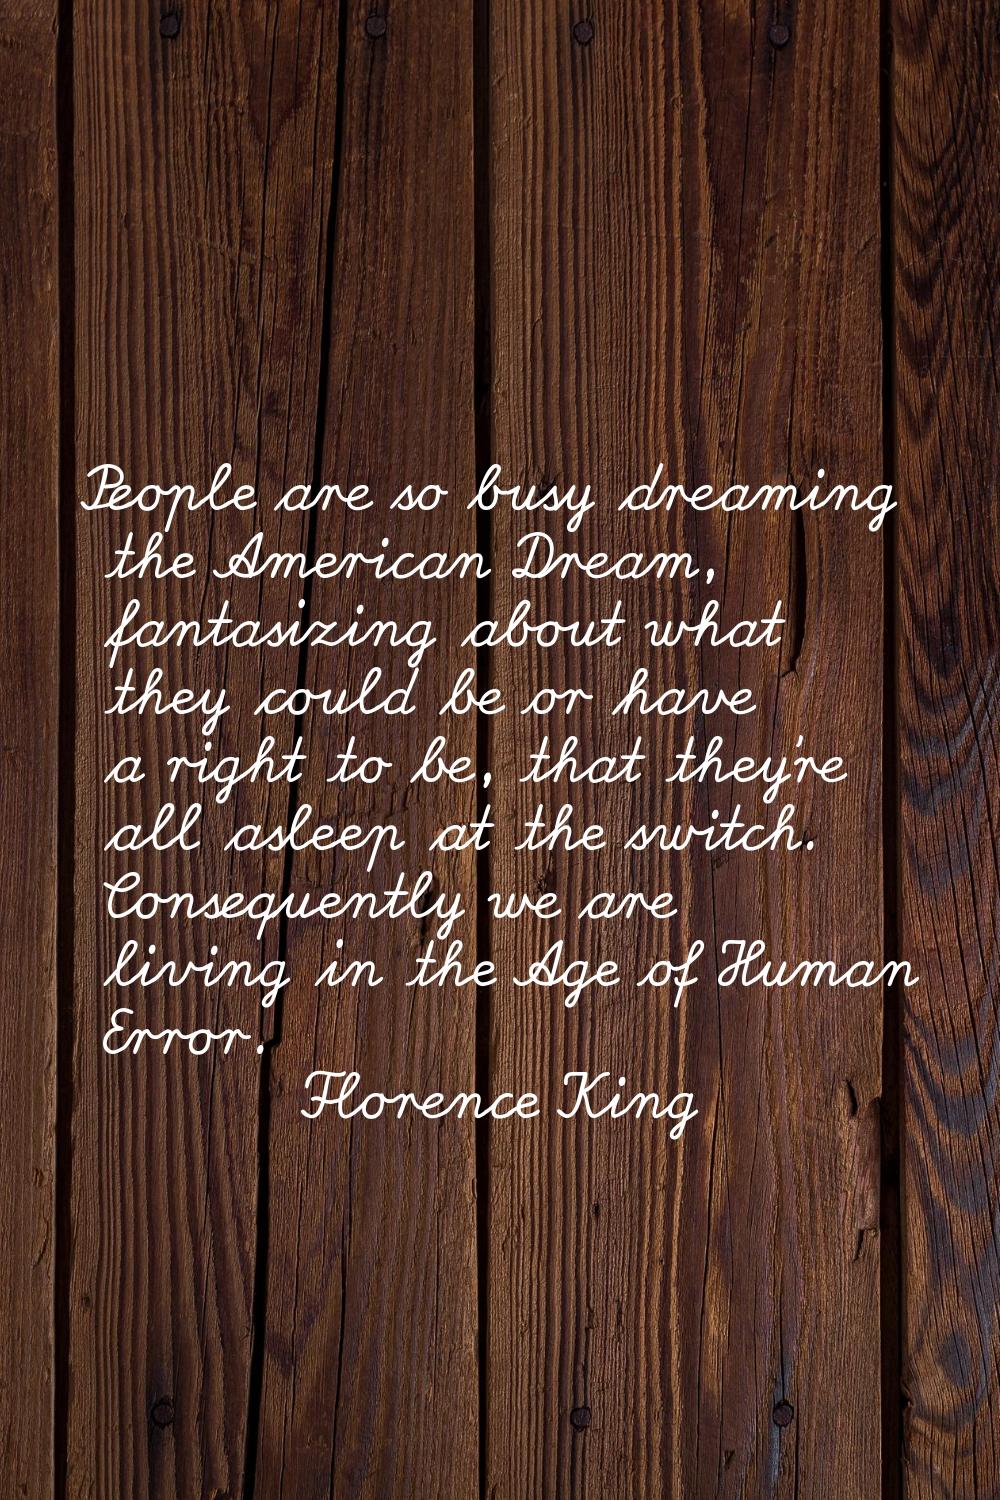 People are so busy dreaming the American Dream, fantasizing about what they could be or have a righ